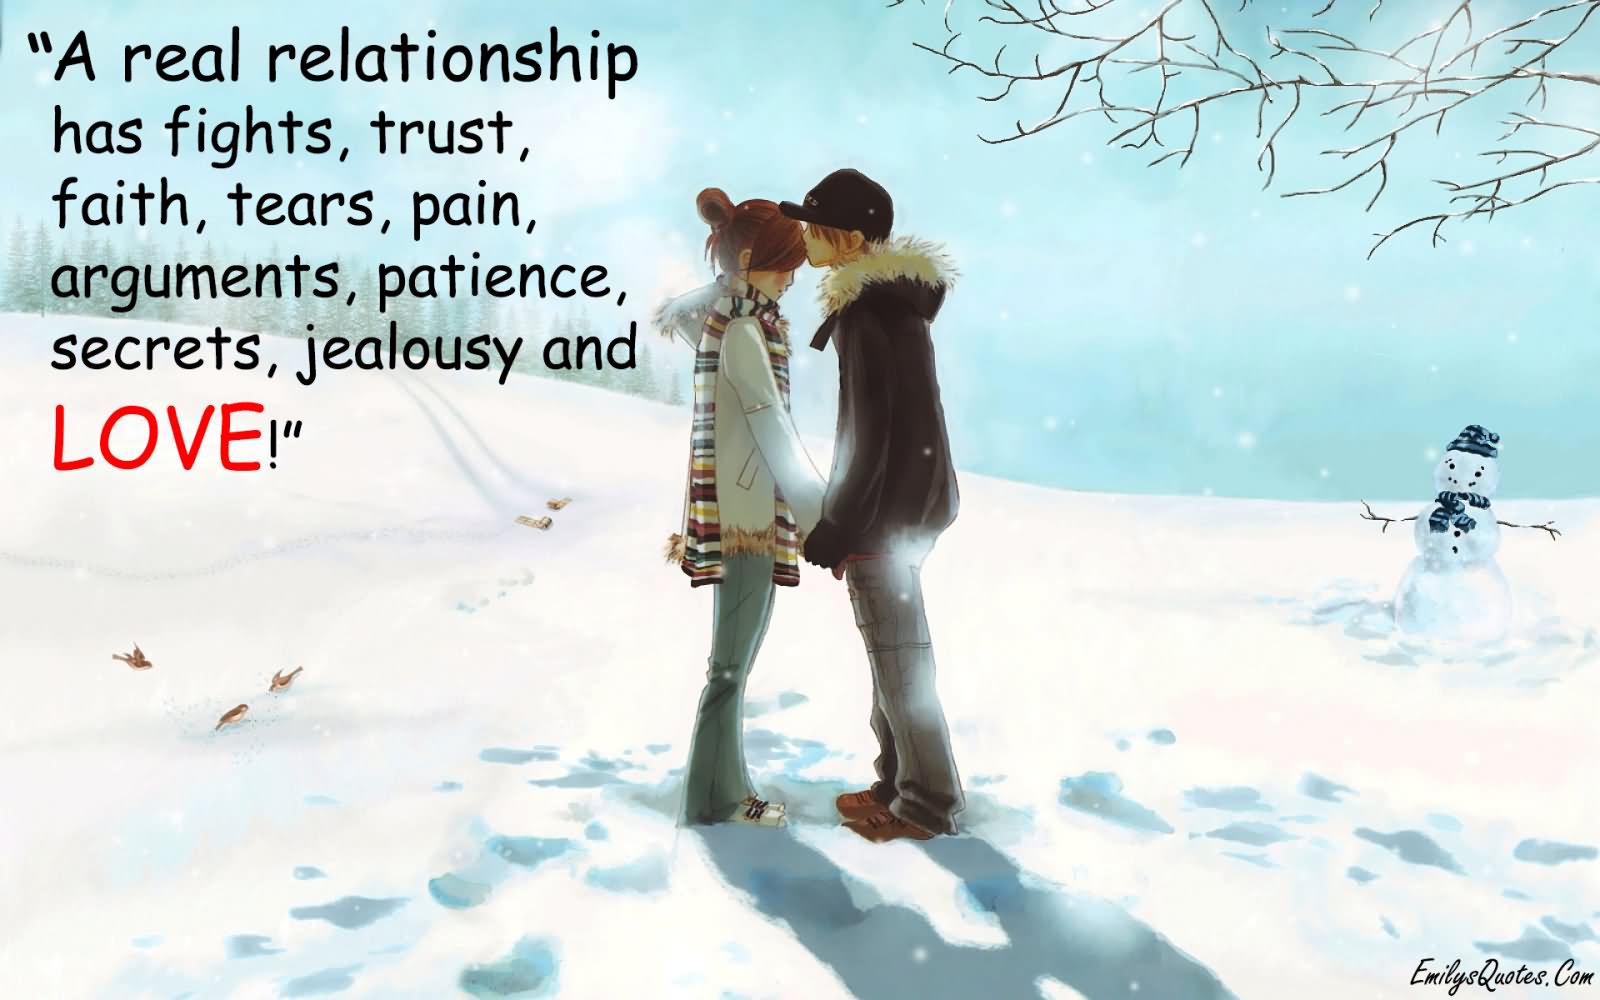 A real relationship has fights, trust, faith, tears, pain, arguments, patience, secrets, jealousy and LOVE.